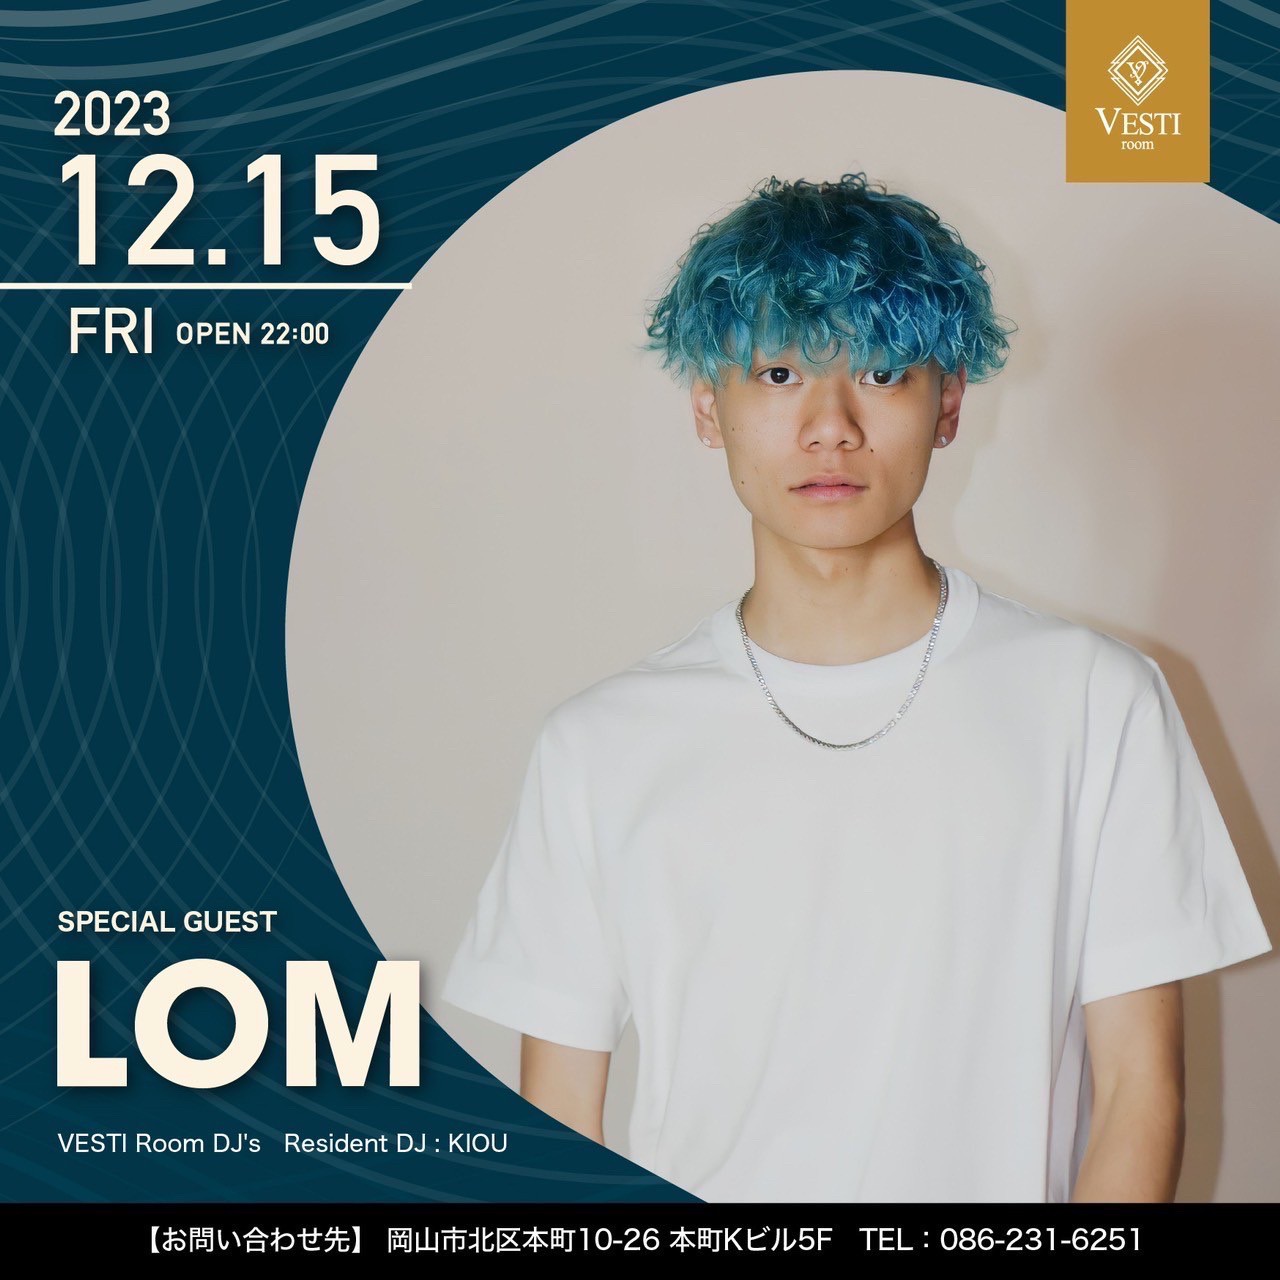 SPECIAL GUEST : LOM